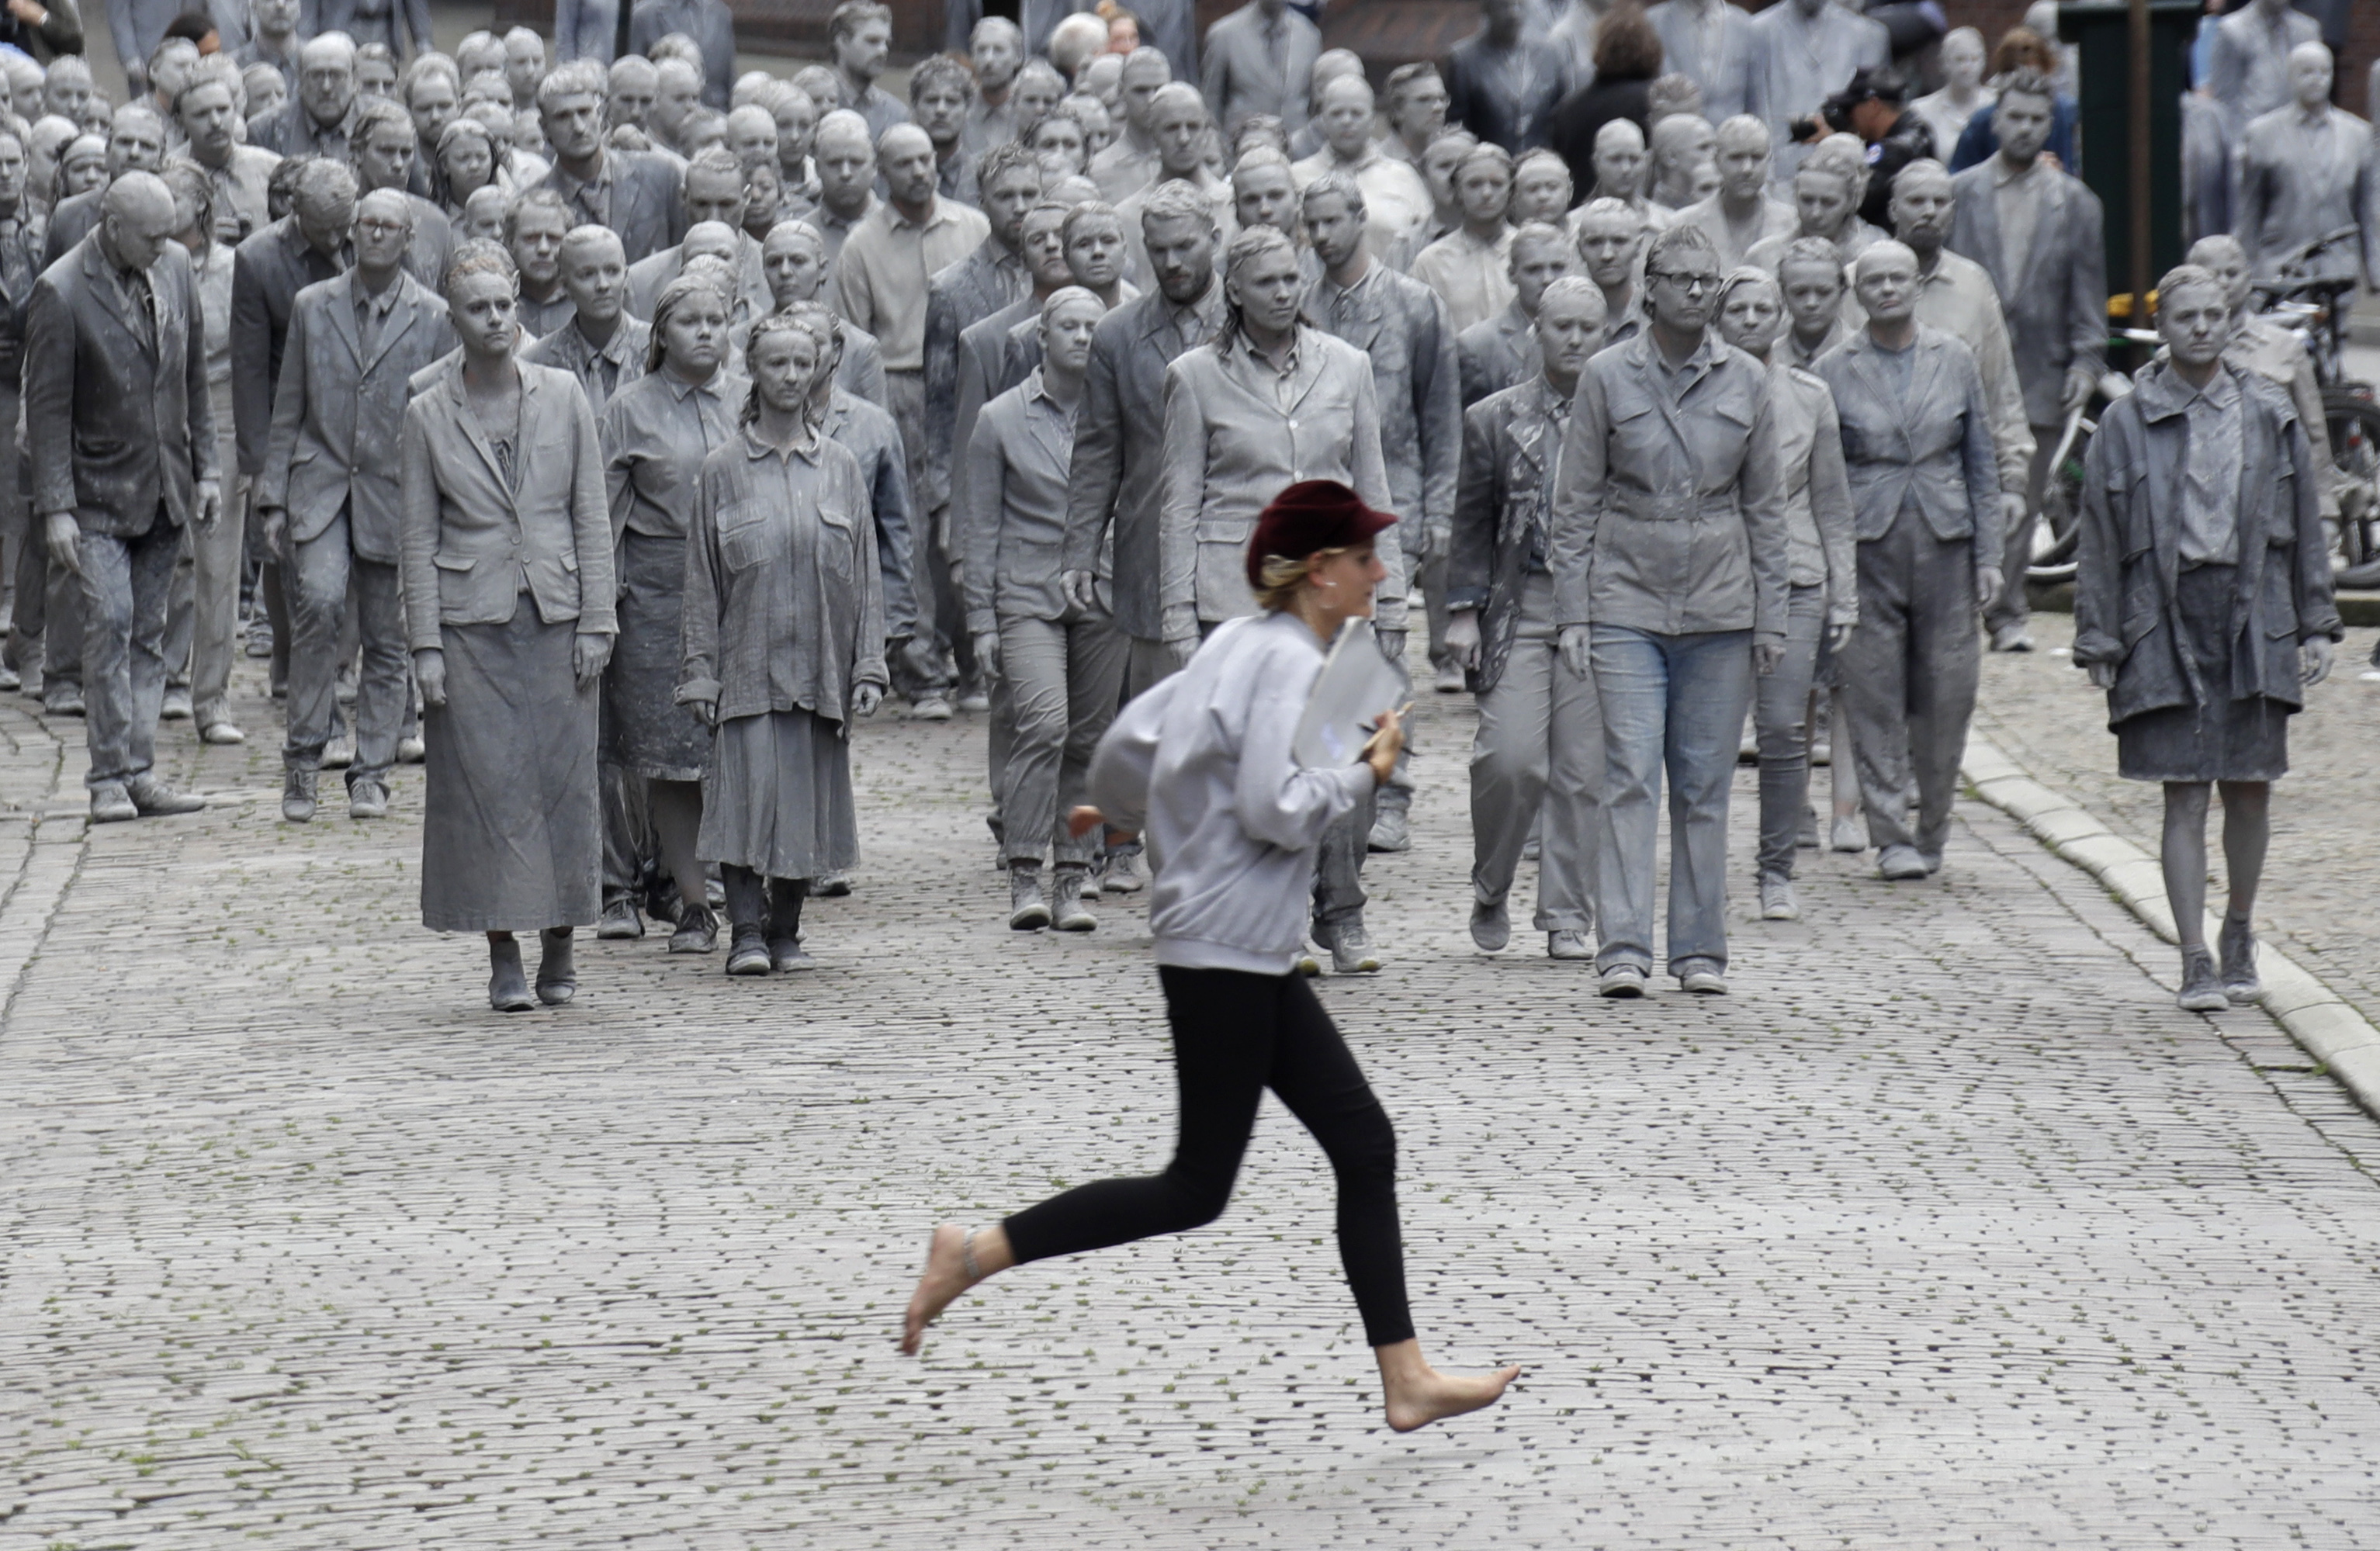 A woman crosses the street in front of the approaching performance '1000 GESTALTEN' with hundreds of people painted like clay figures moving slowly and silently through the streets of Hamburg to protest against the G-20 summit in Hamburg, northern Germany, Wednesday, July 5, 2017. The leaders of the group of 20 meet July 7 and 8. (AP Photo/Matthias Schrader)